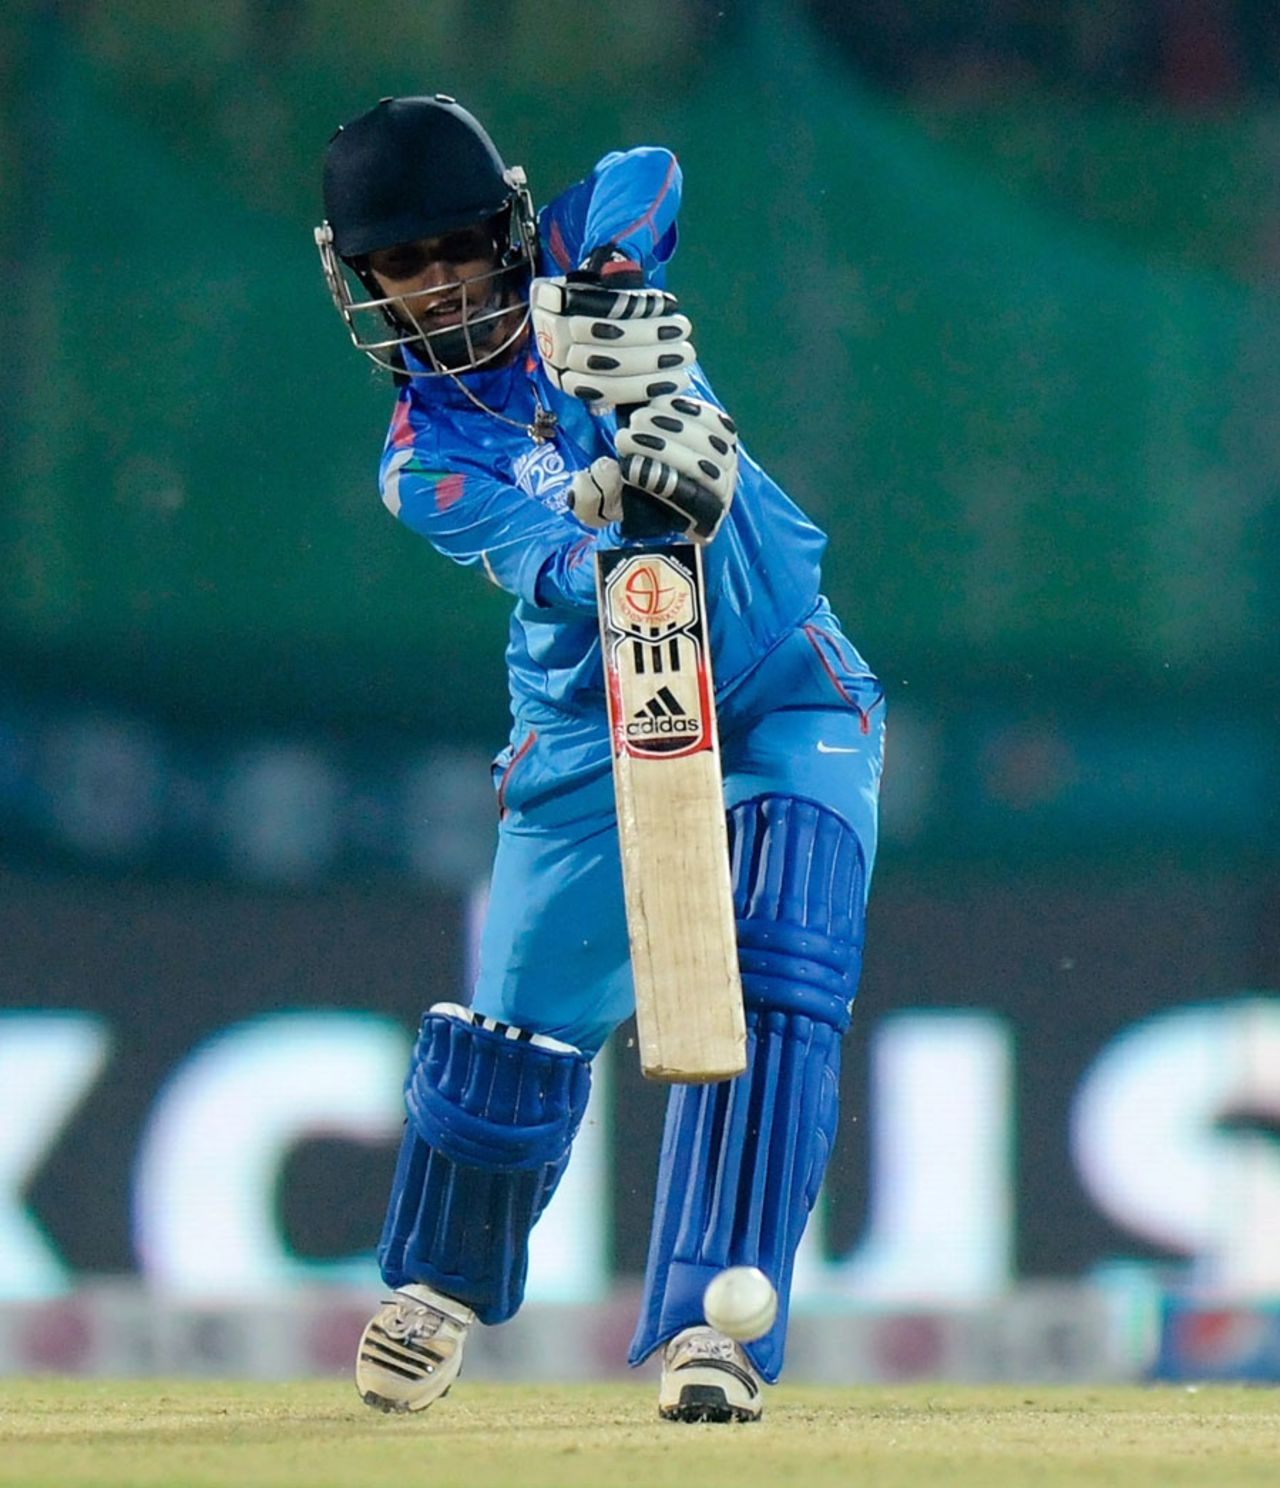 Mithali Raj accounted for 57 of India Women's total of 95, England v India, Women's World T20, Group B, Sylhet, March 26, 2014 